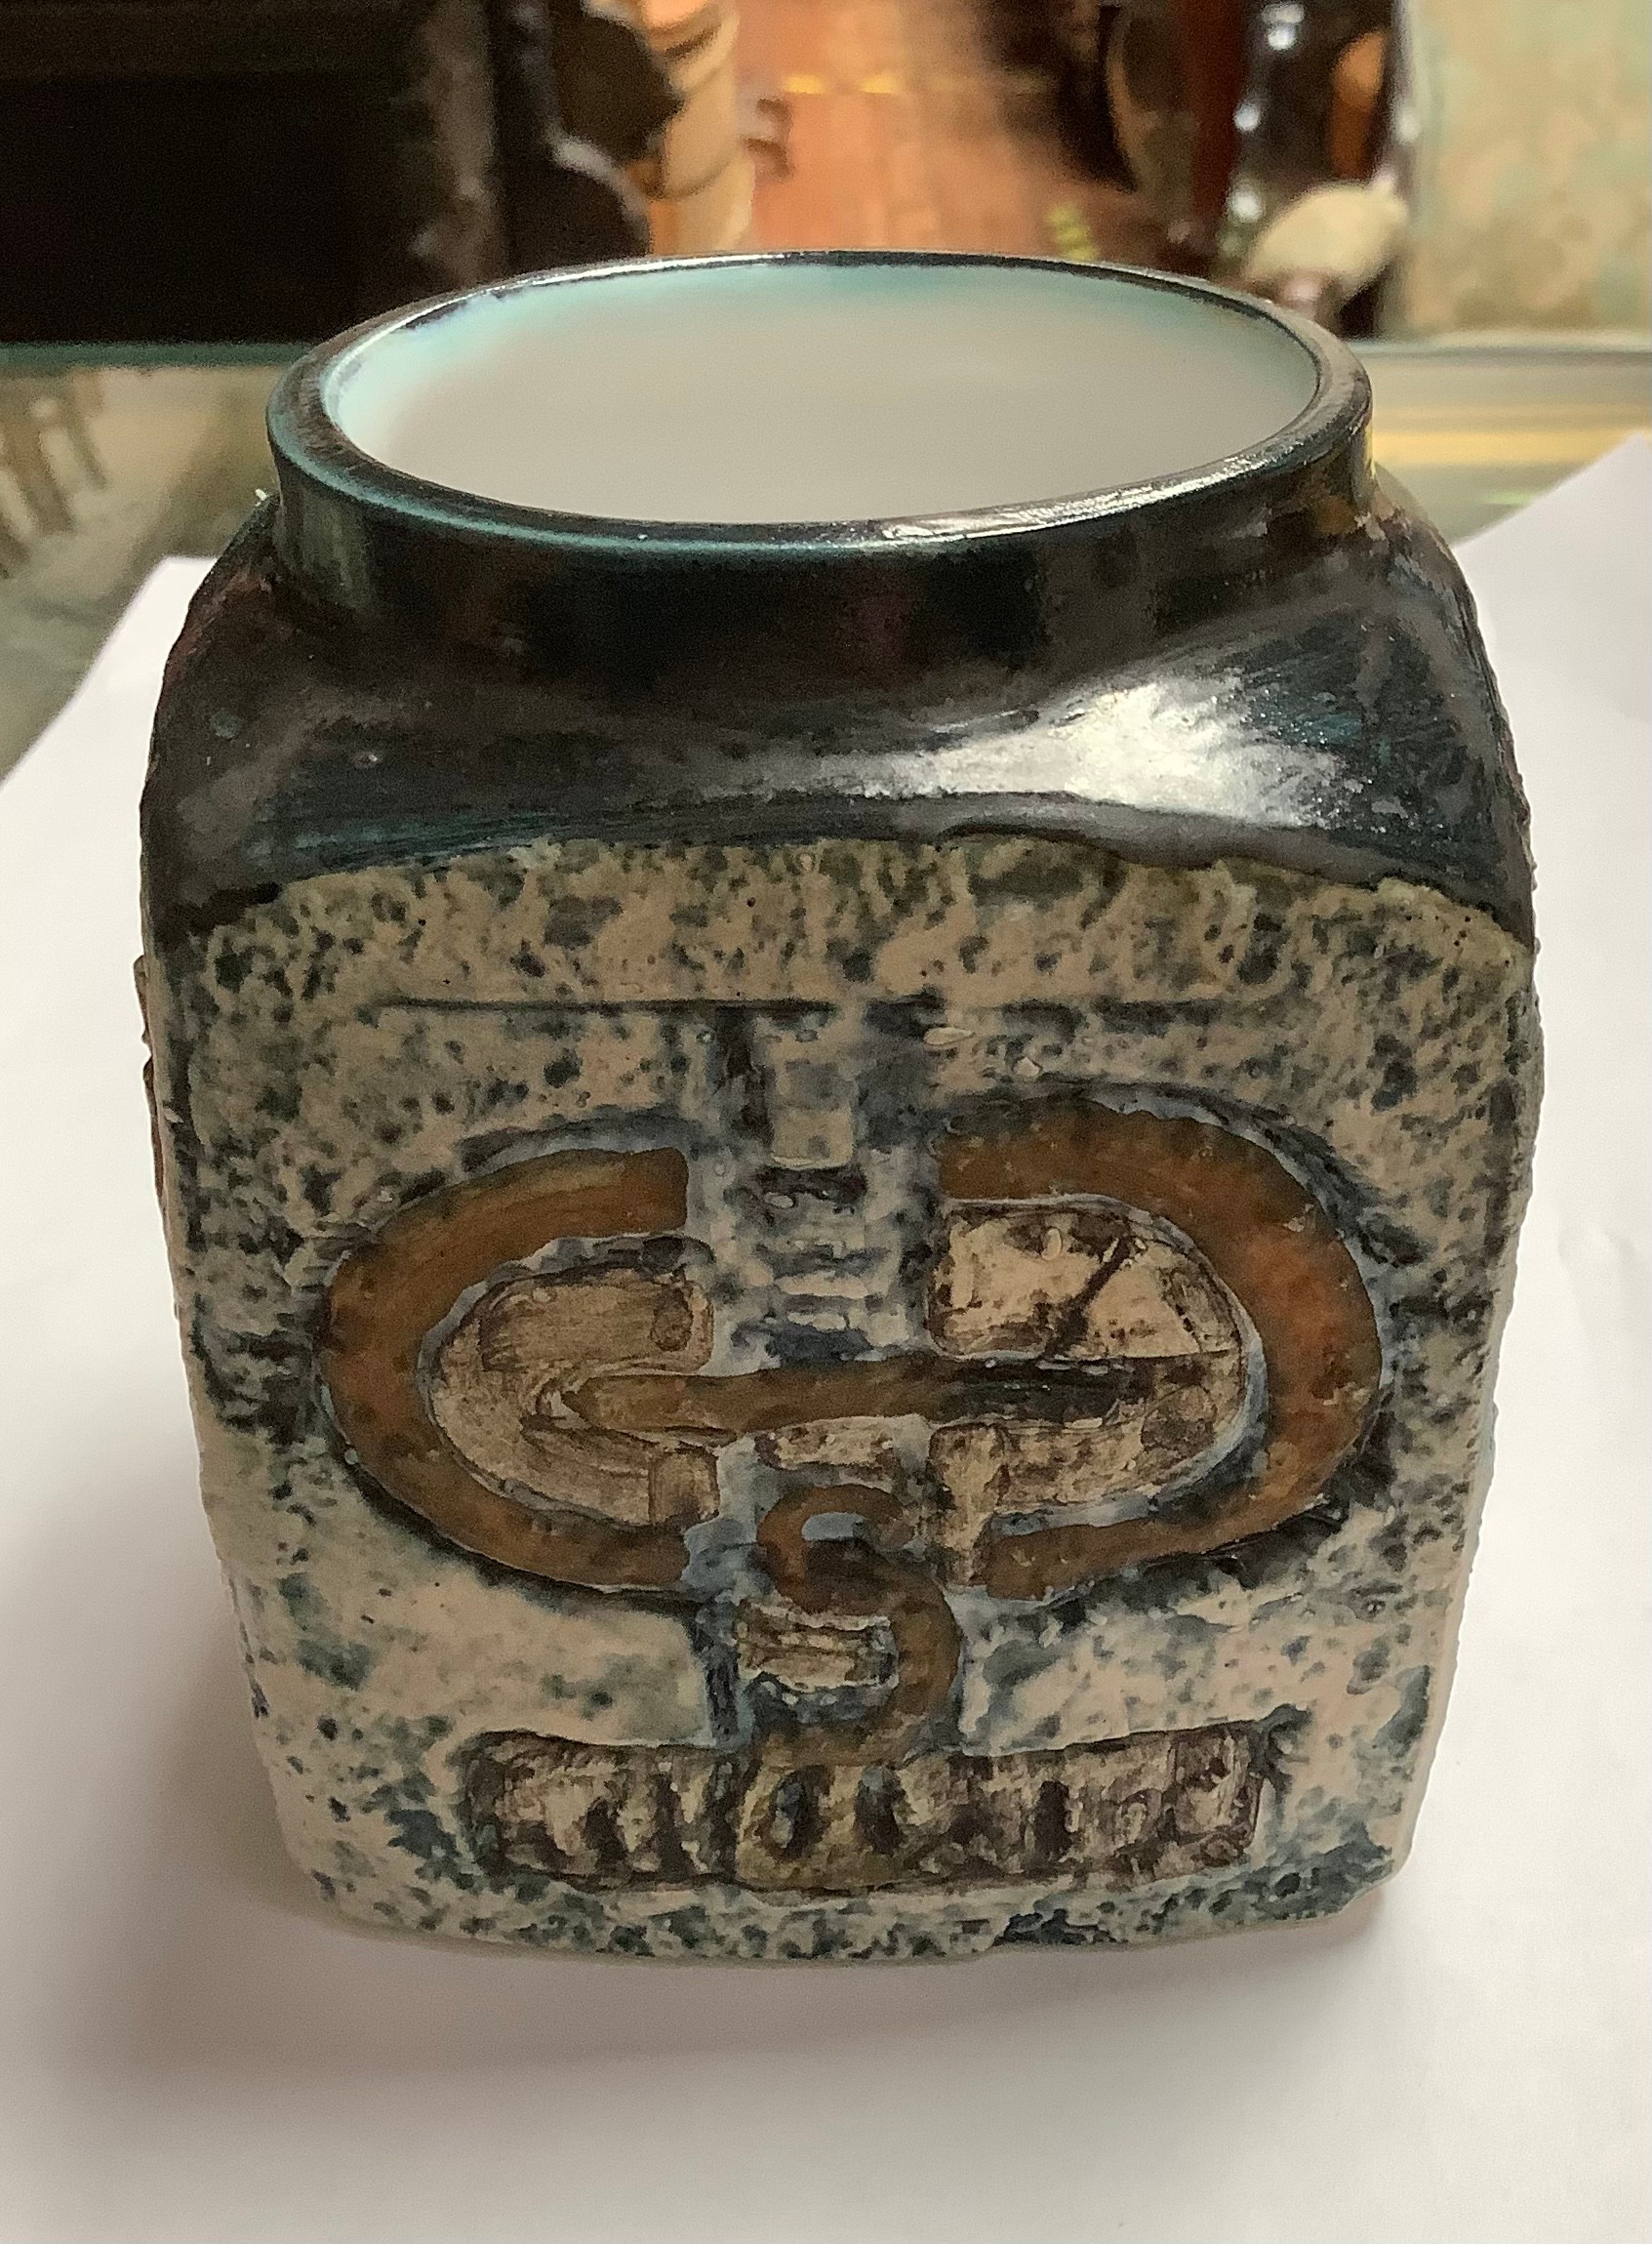 A Troika Pottery marmalade pot decorated by Annette Walters, with incised and painted abstract - Image 3 of 5